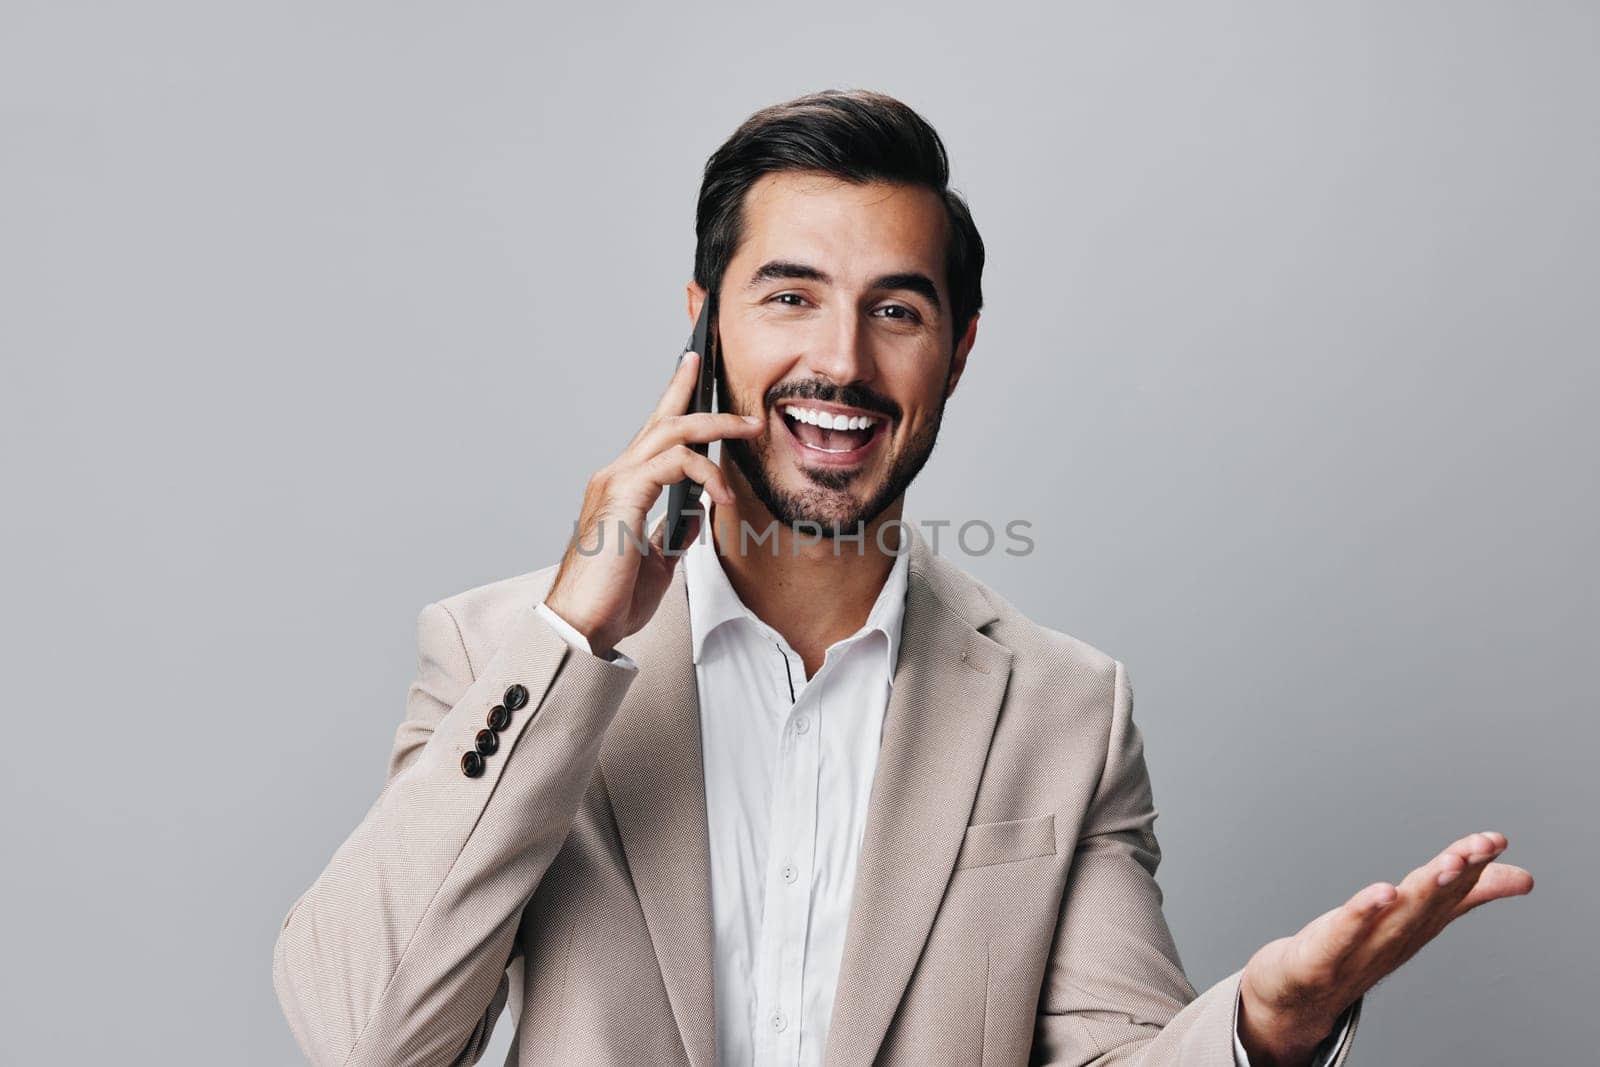 man communication cell studio hold selfies internet smile call isolated phone suit portrait smartphone adult message background gray trading business male happy